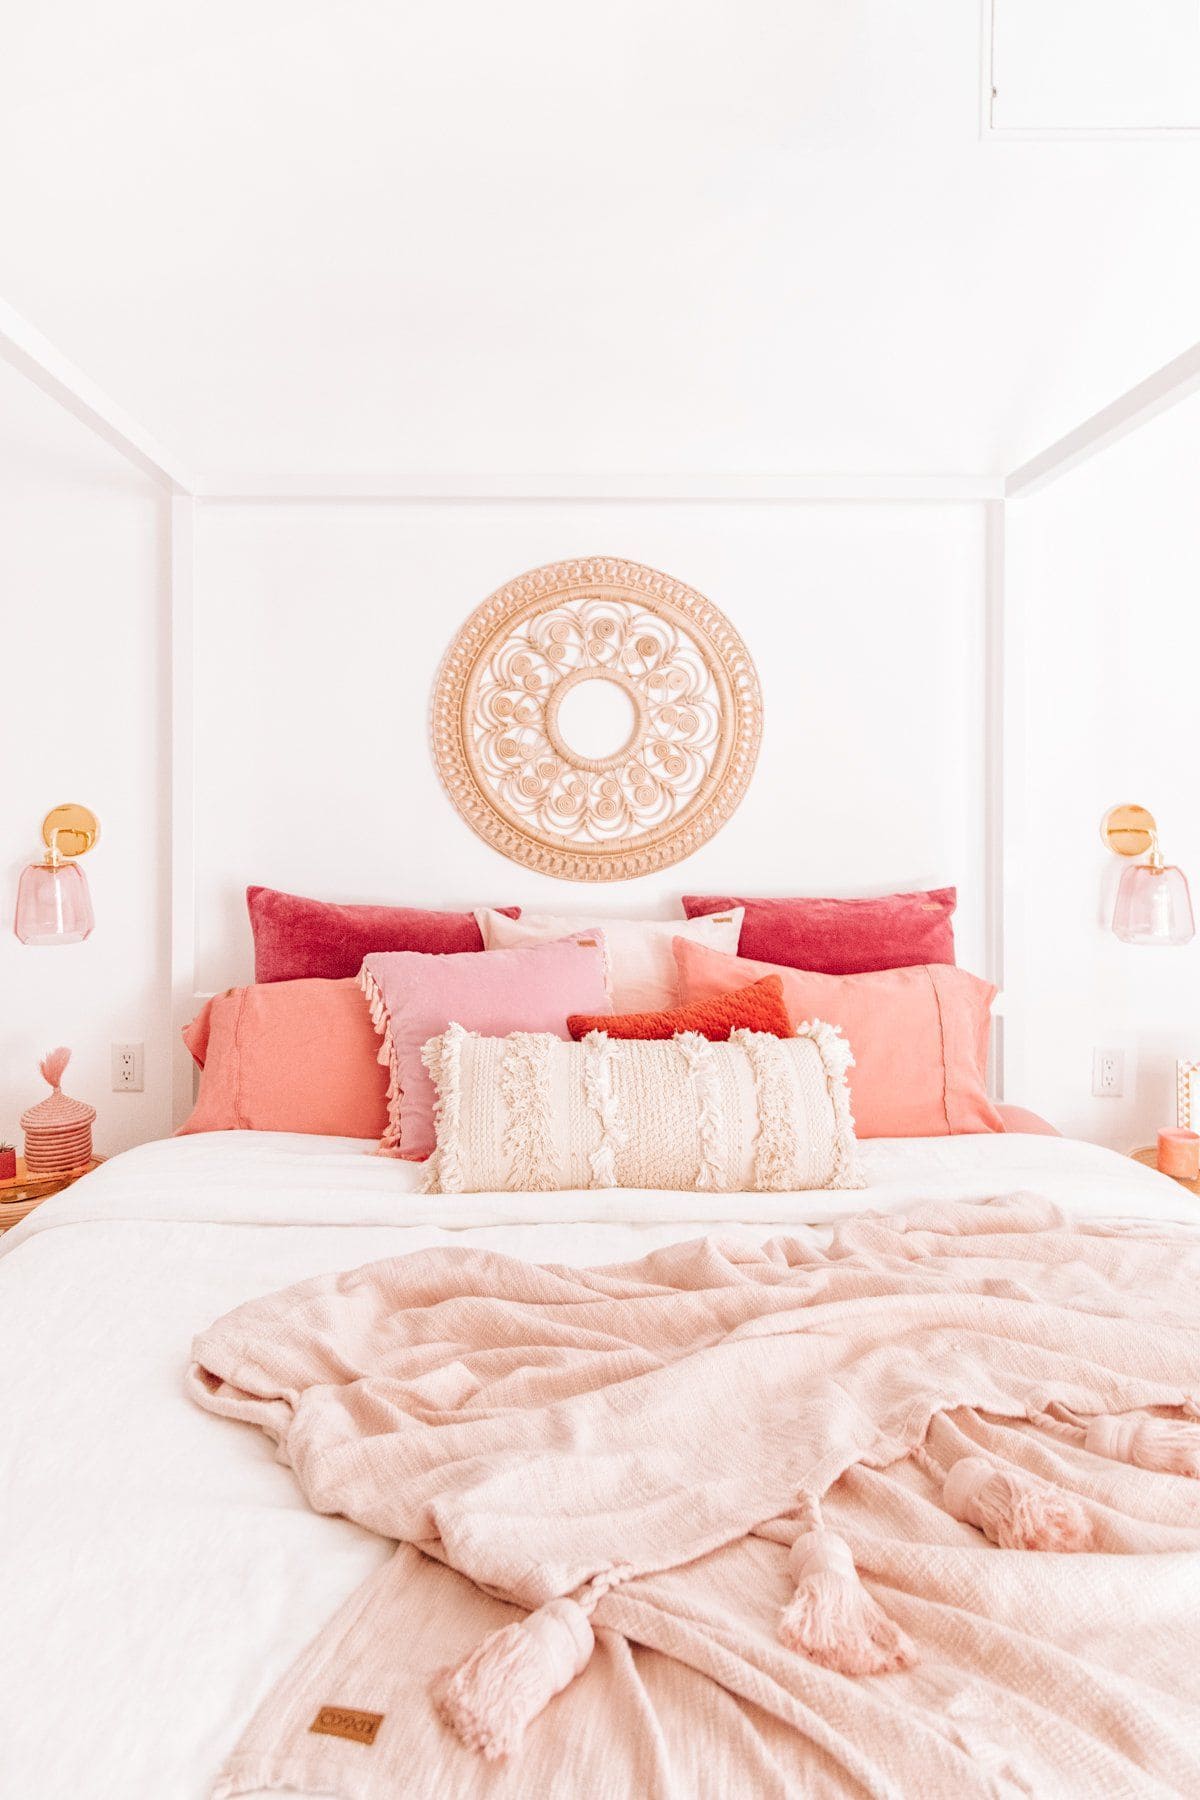 25 pale pink room design ideas that will fascinate all women - 91